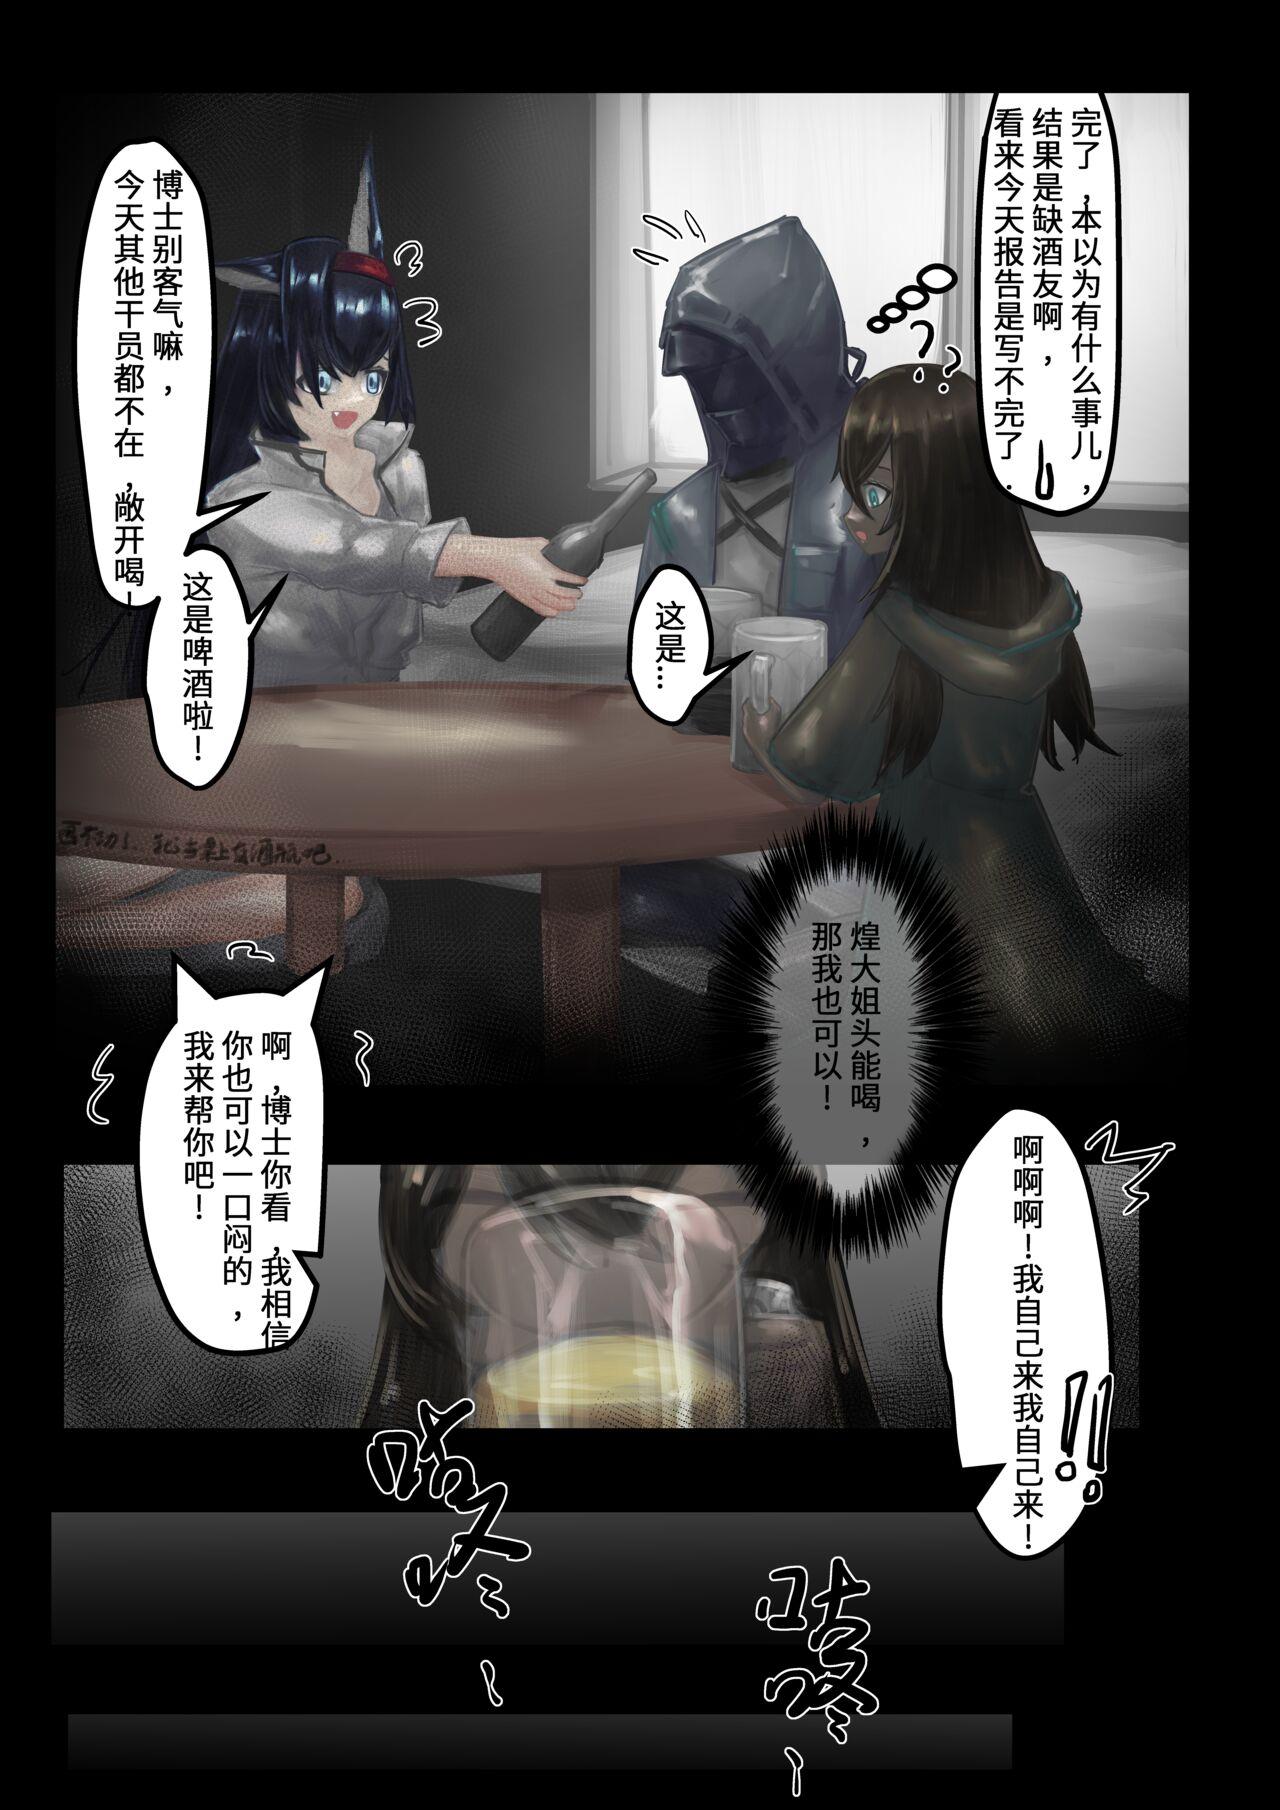 Chaturbate Marknights:蜂鸟沉醉其中 - Arknights Amante - Page 5